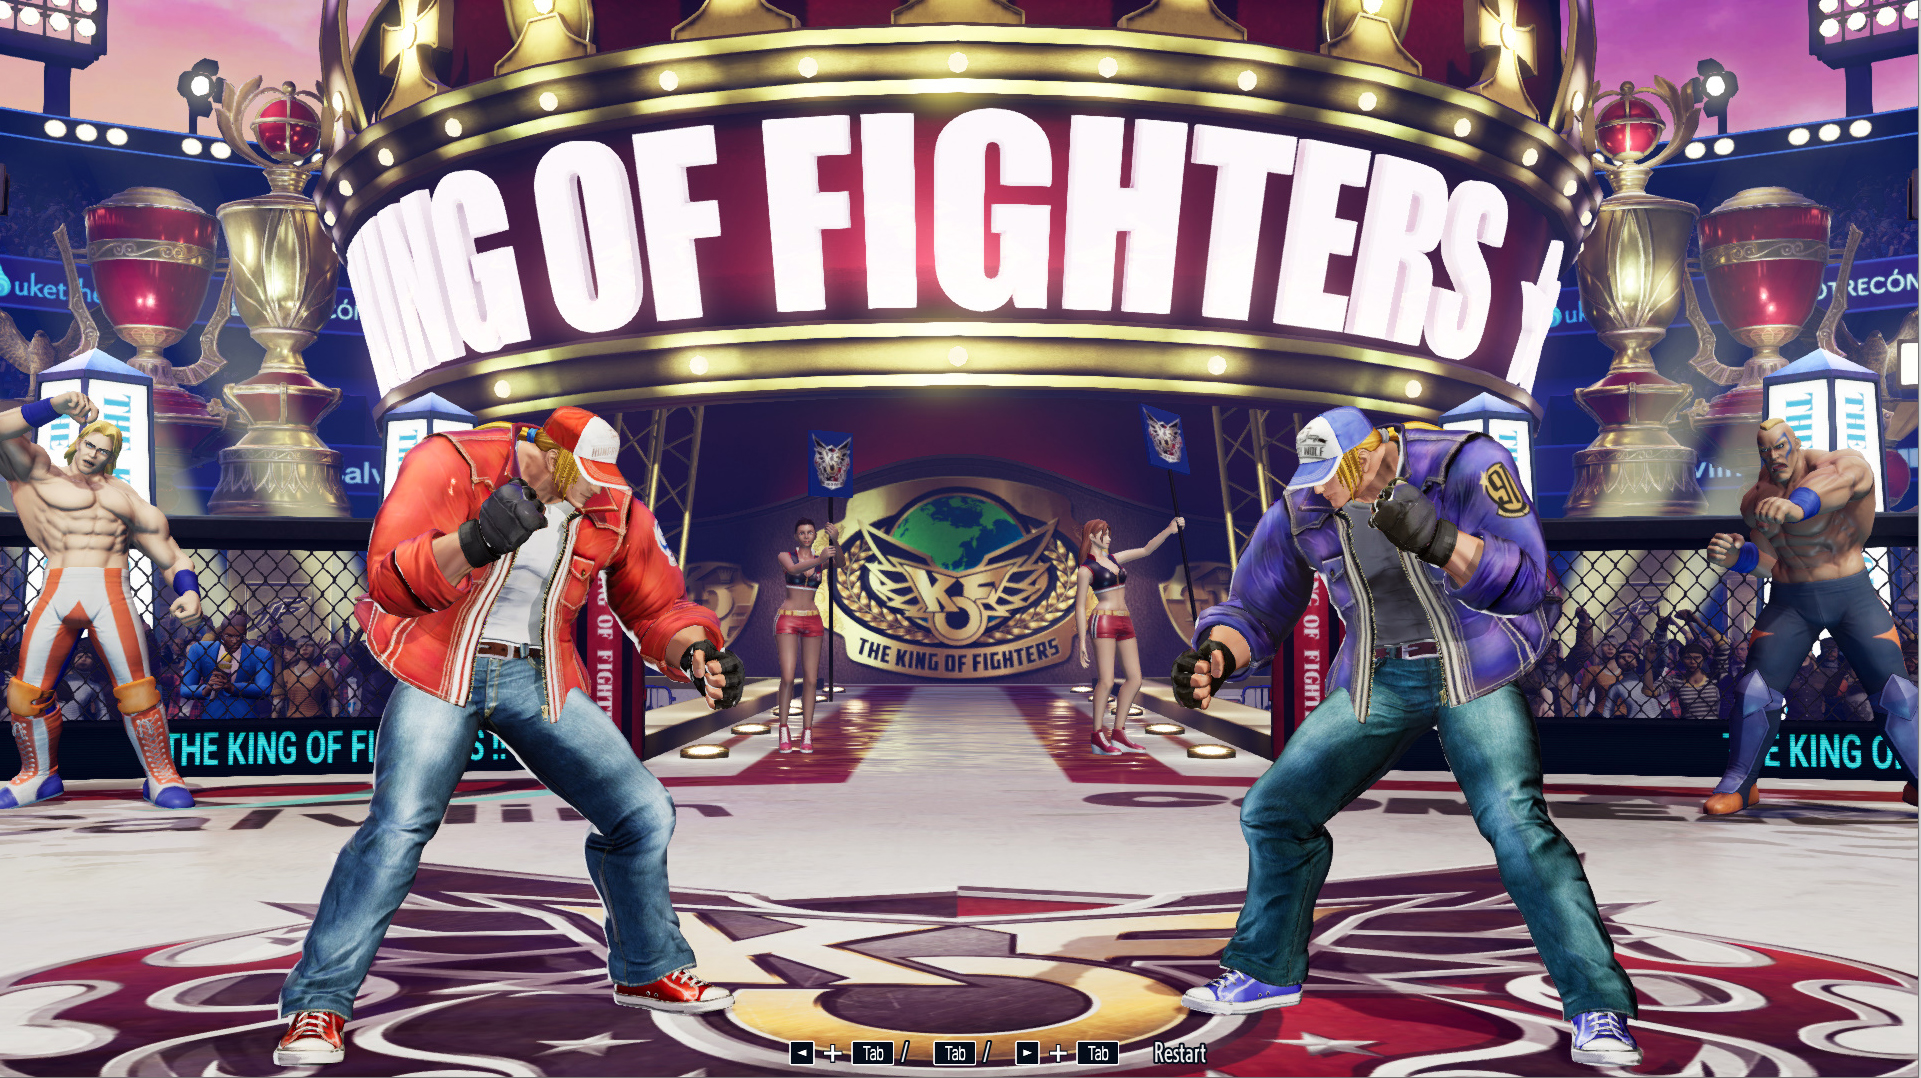 The King of Fighters XV Mods on StreetModders - DeviantArt